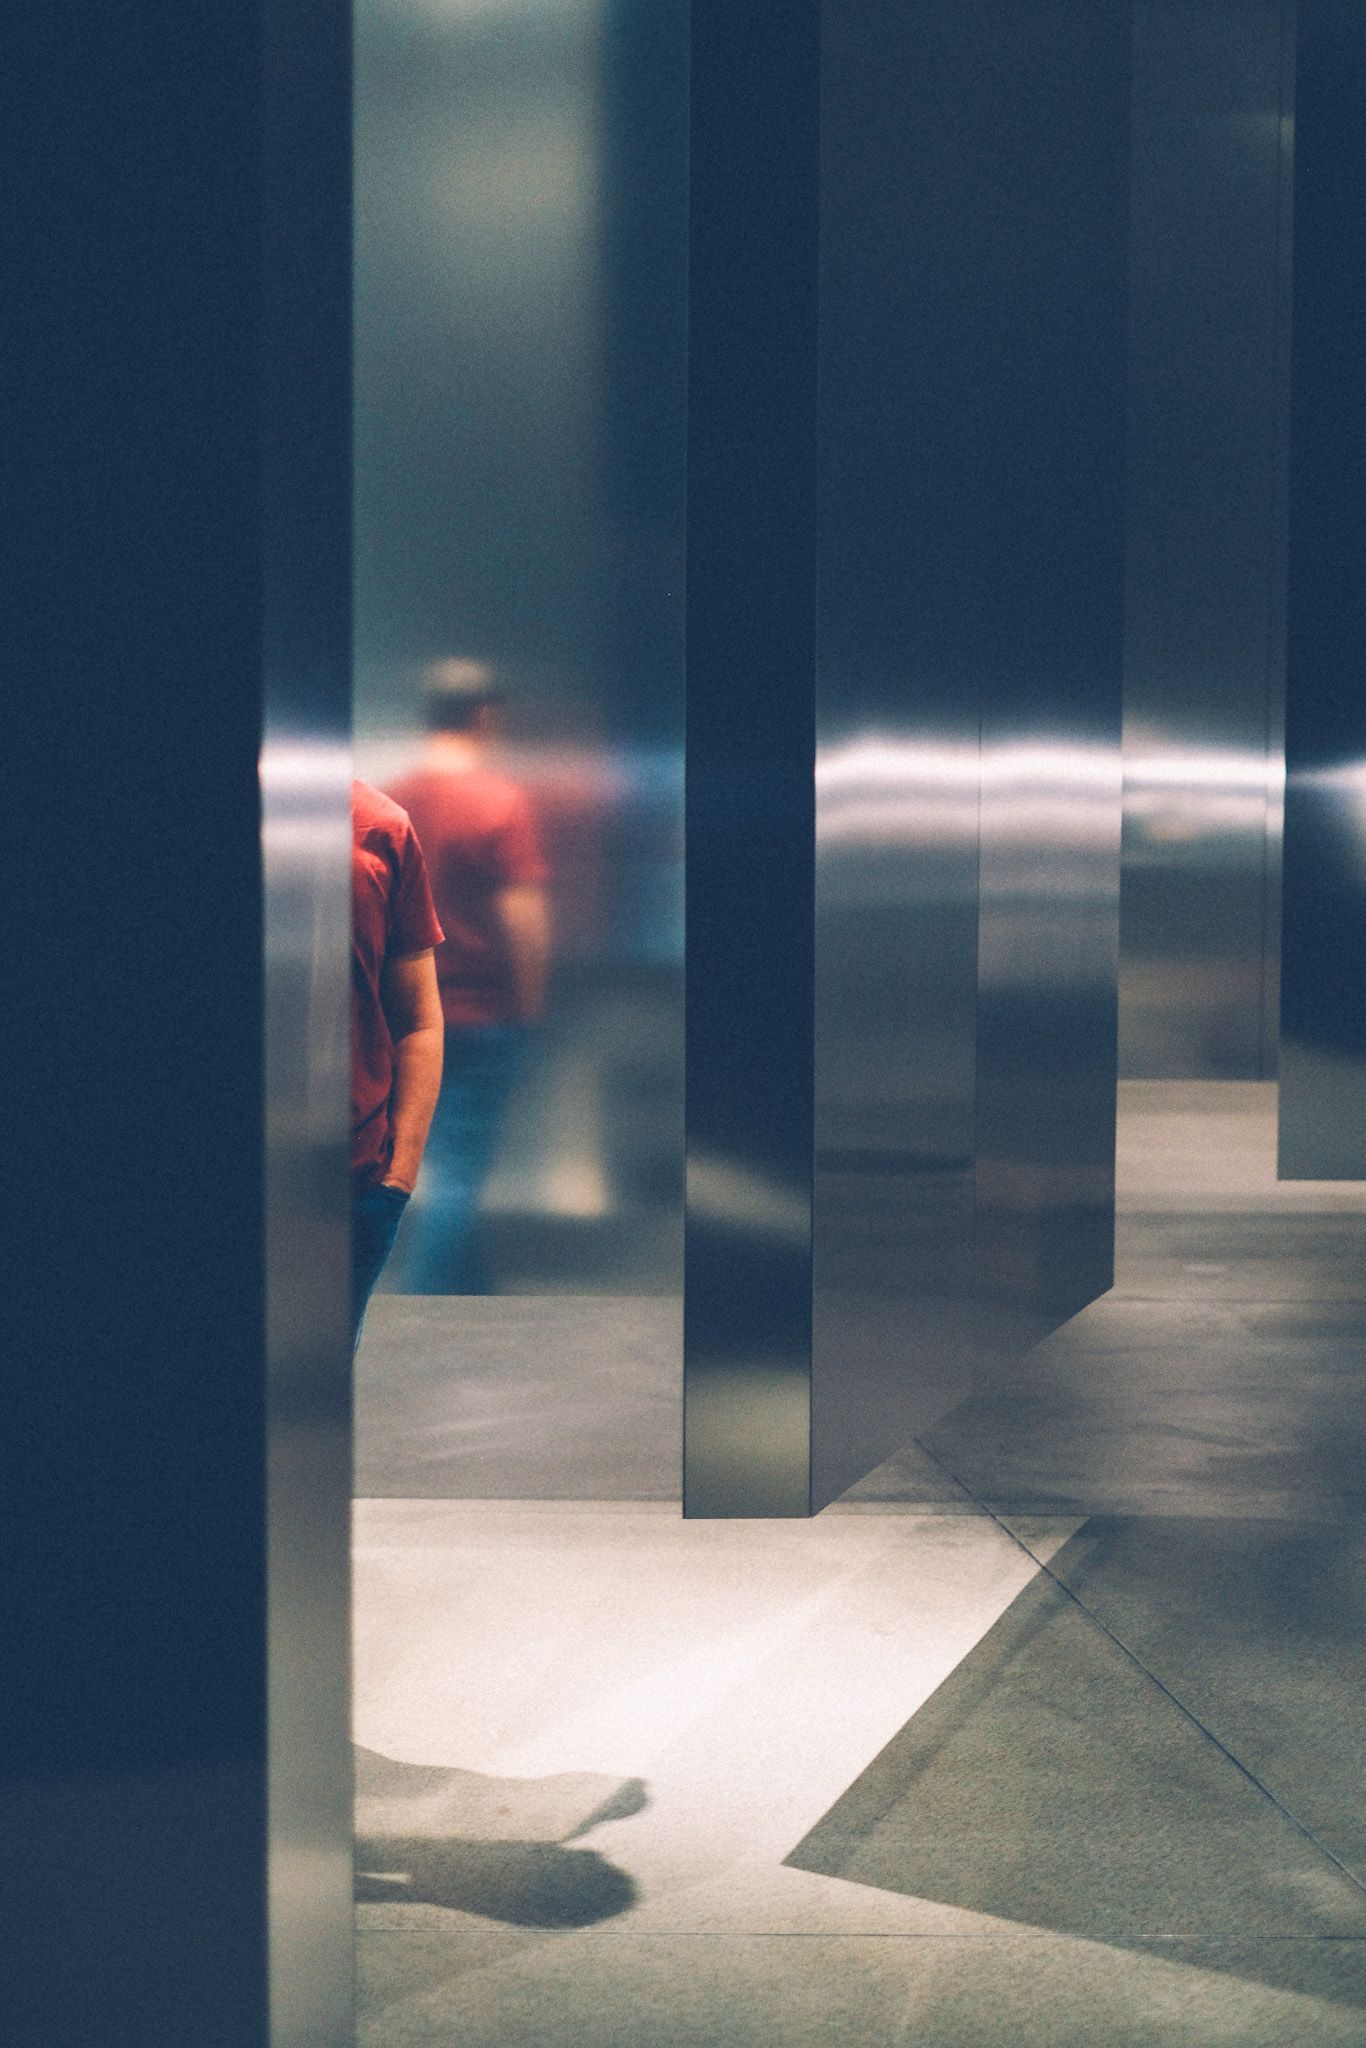 A slice of a torso of a man in a red shirt and jeans appears reflected among tall, aluminum, sharply angled columns.